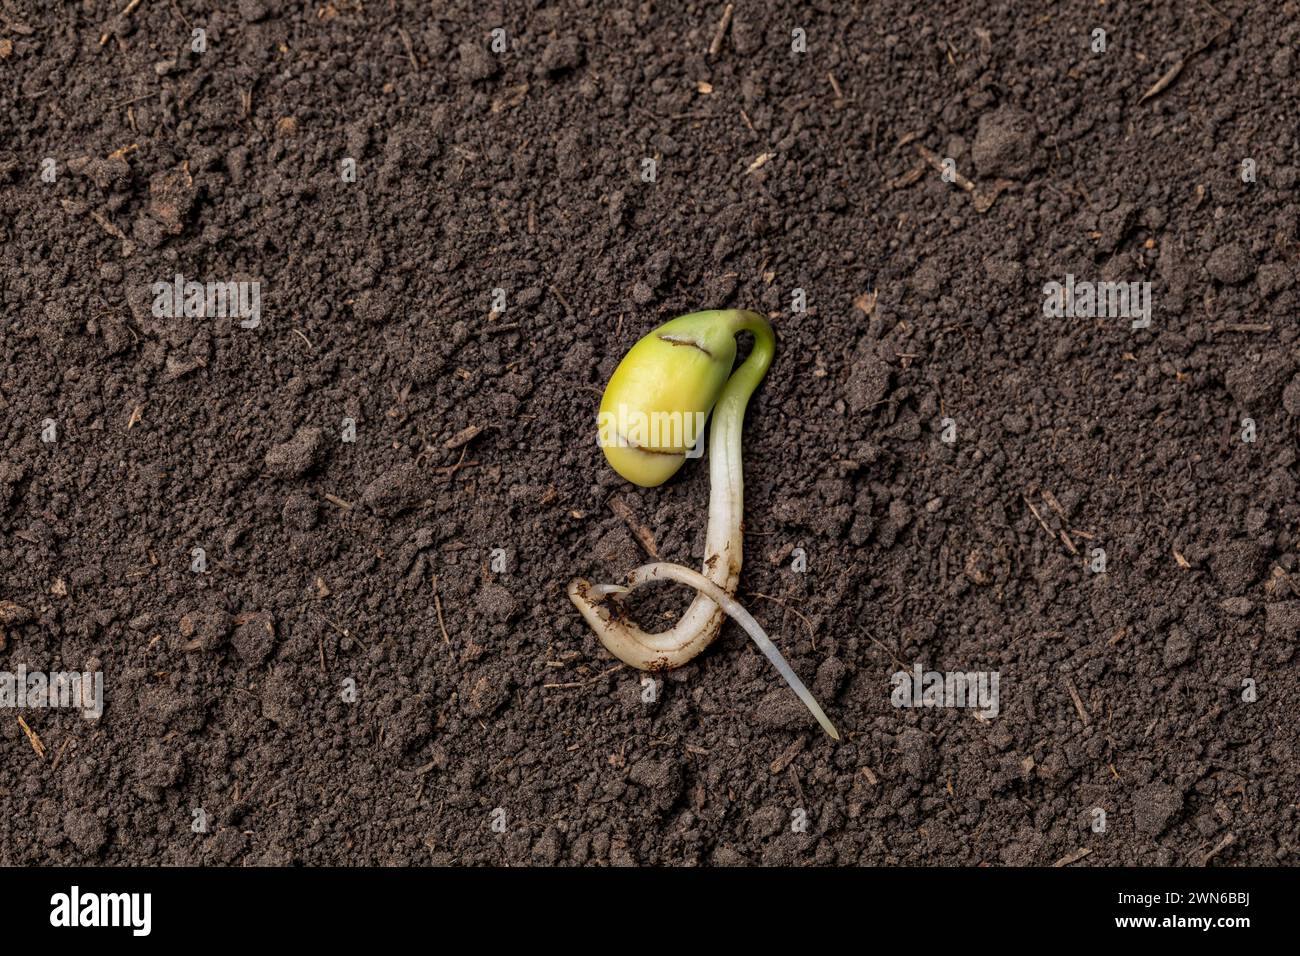 Closeup of soybean seed germination in soil of field. Agriculture, agronomy and farming concept. Stock Photo